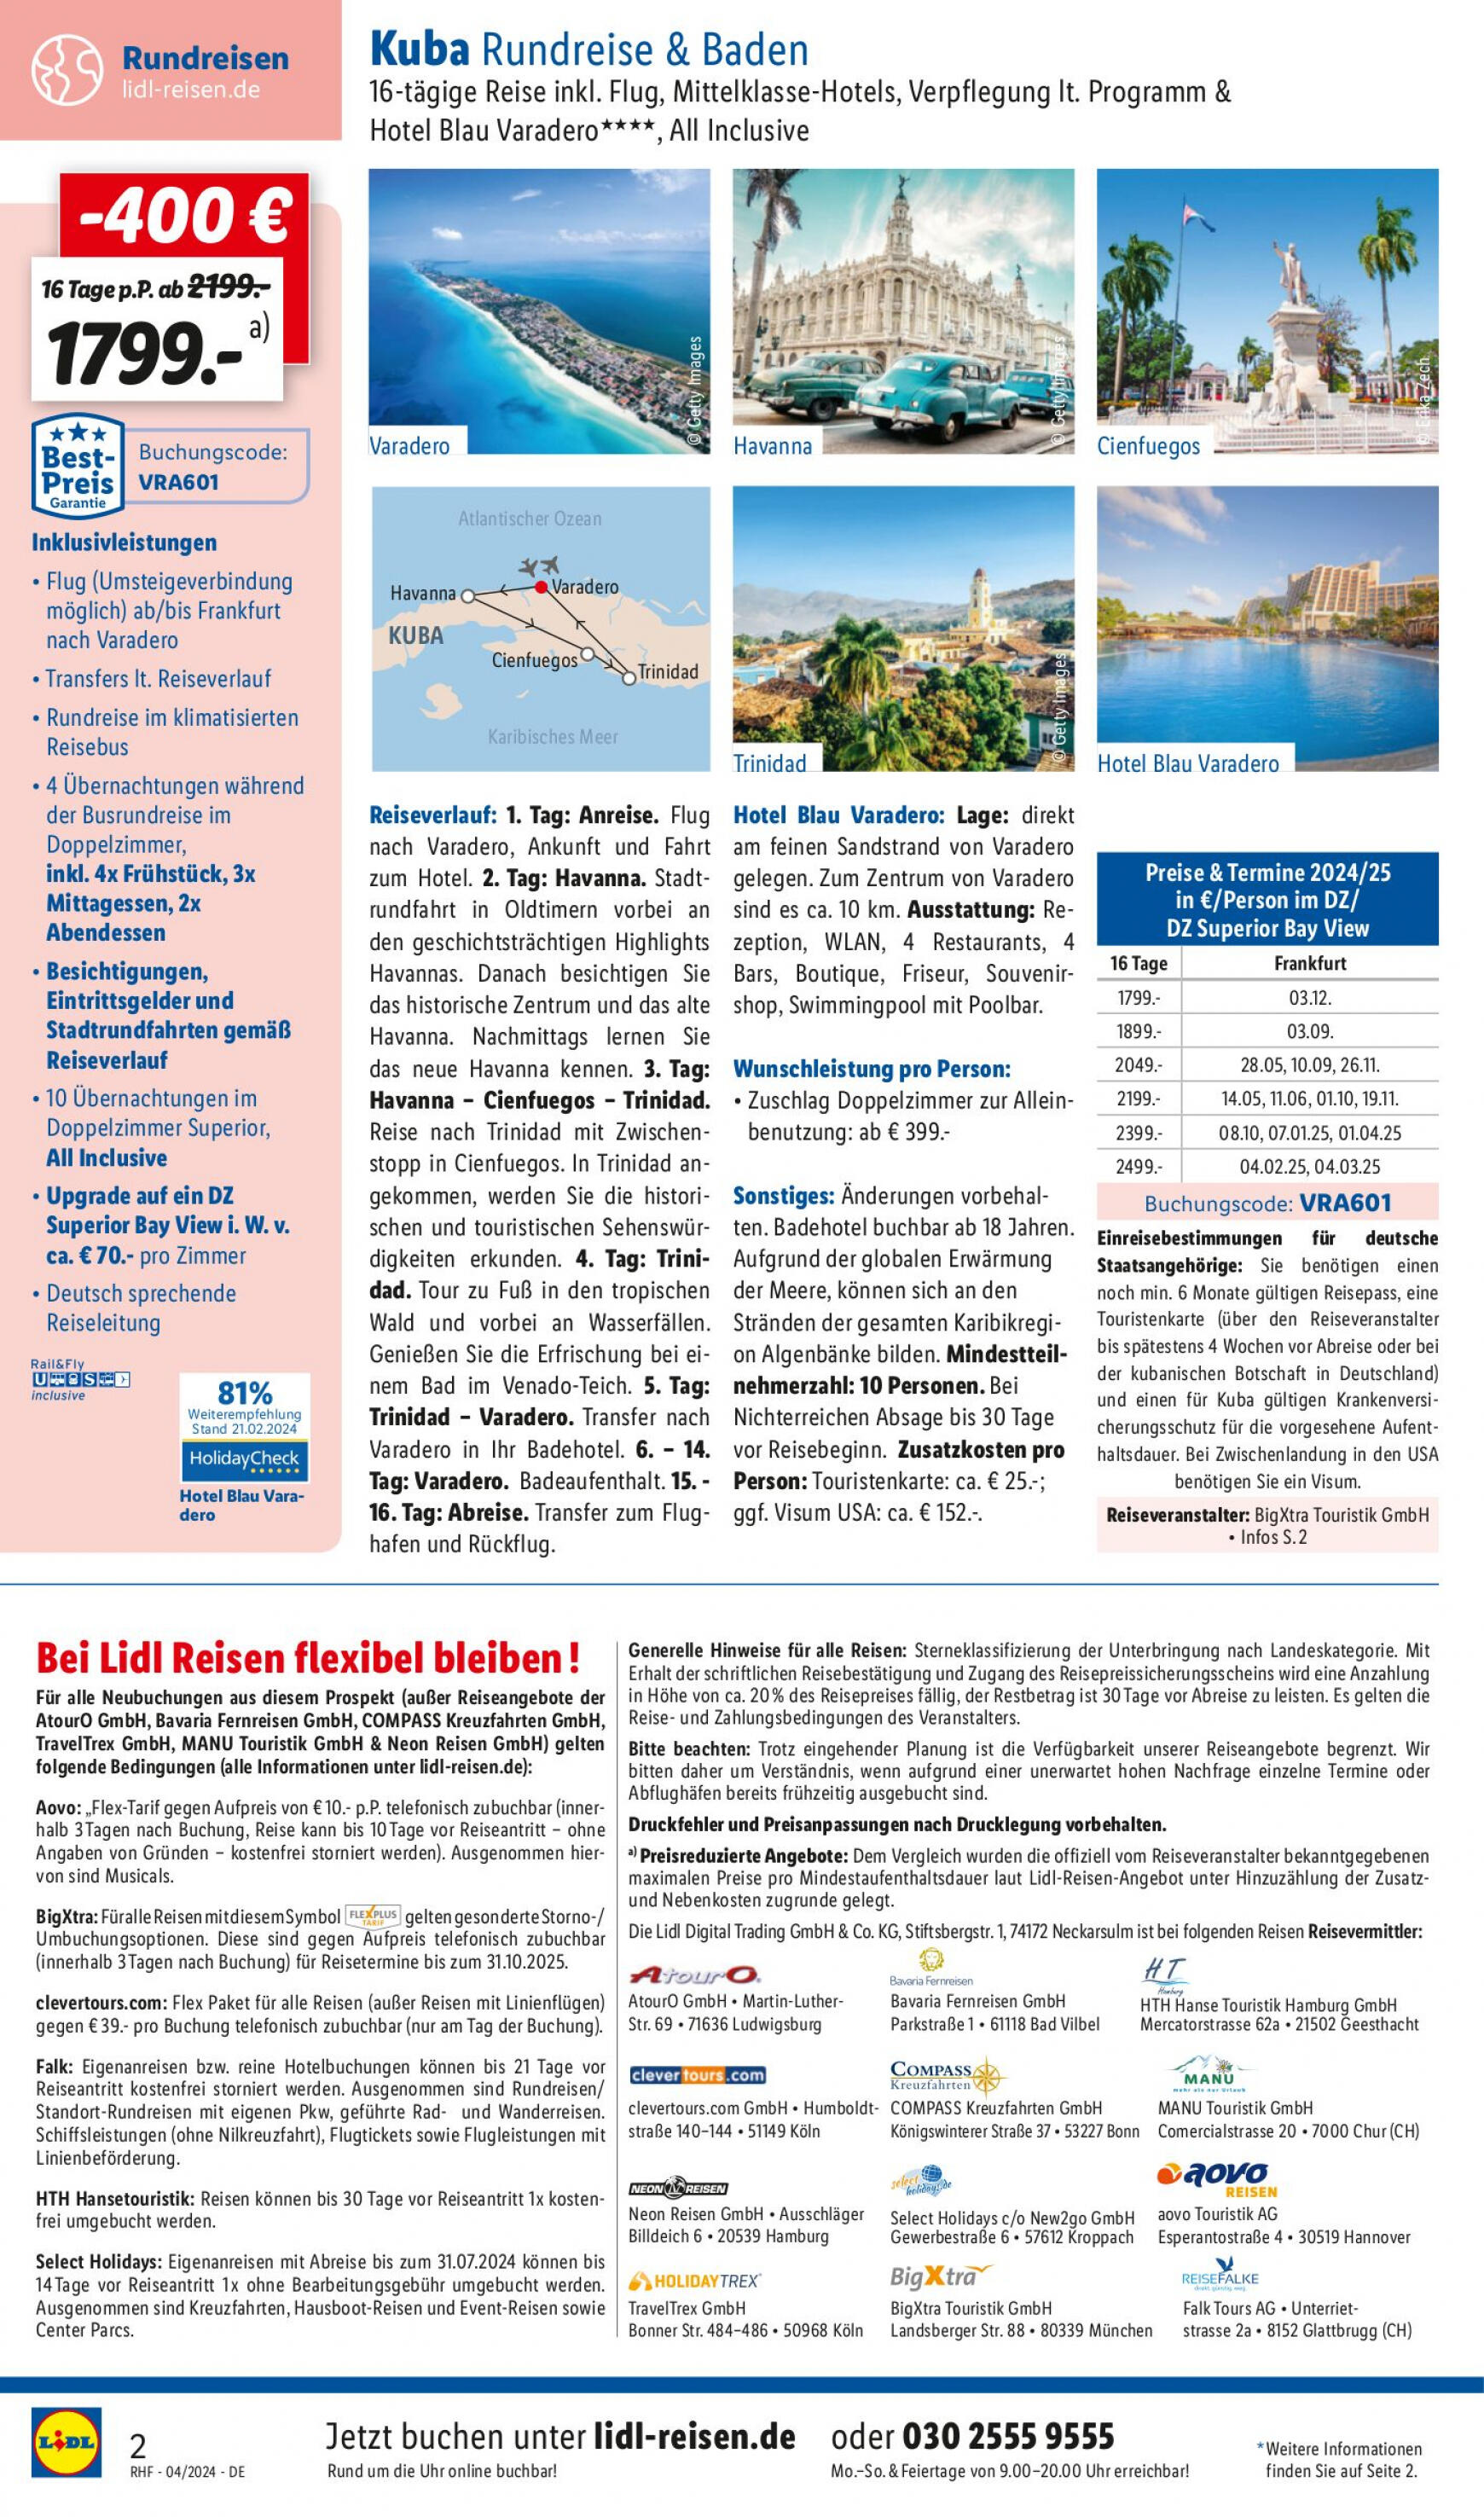 lidl - Flyer Lidl - April Reise-Highlights aktuell 27.03. - 30.04. - page: 2